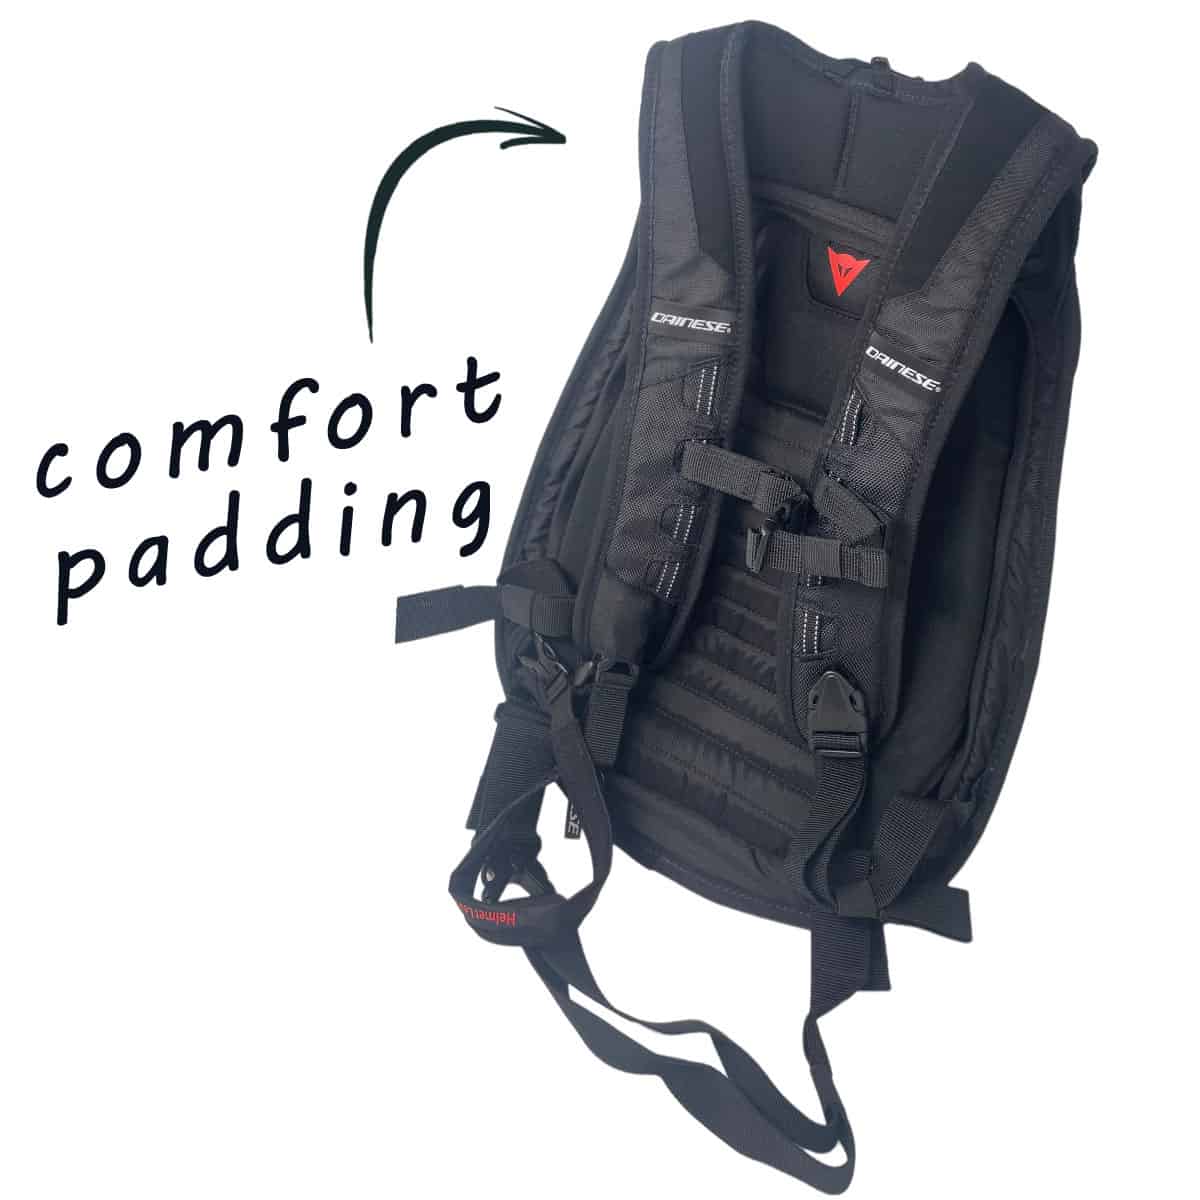 Dainese D-Mach Compact Backpack: Your streamlined clam-shell rucksack - comfort padding